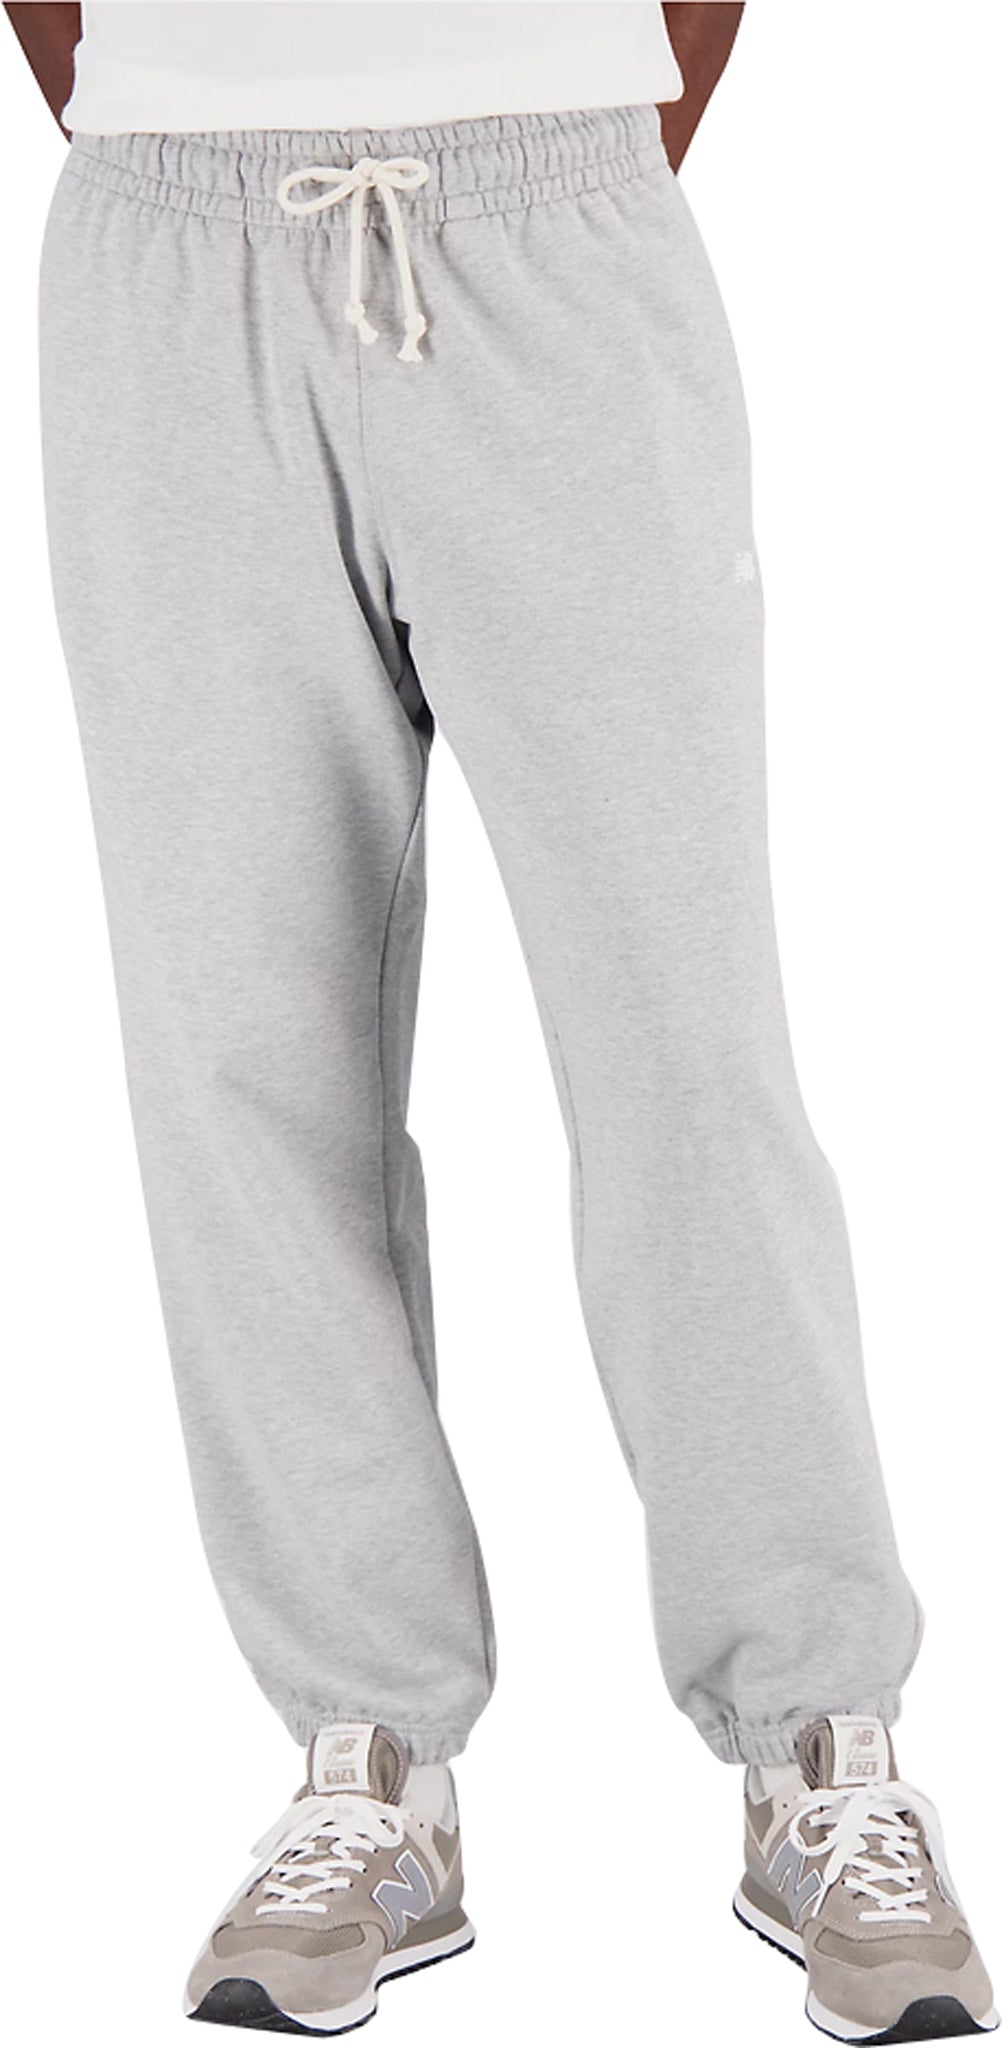 New Balance Athletics Remastered French Terry Pant - Women's